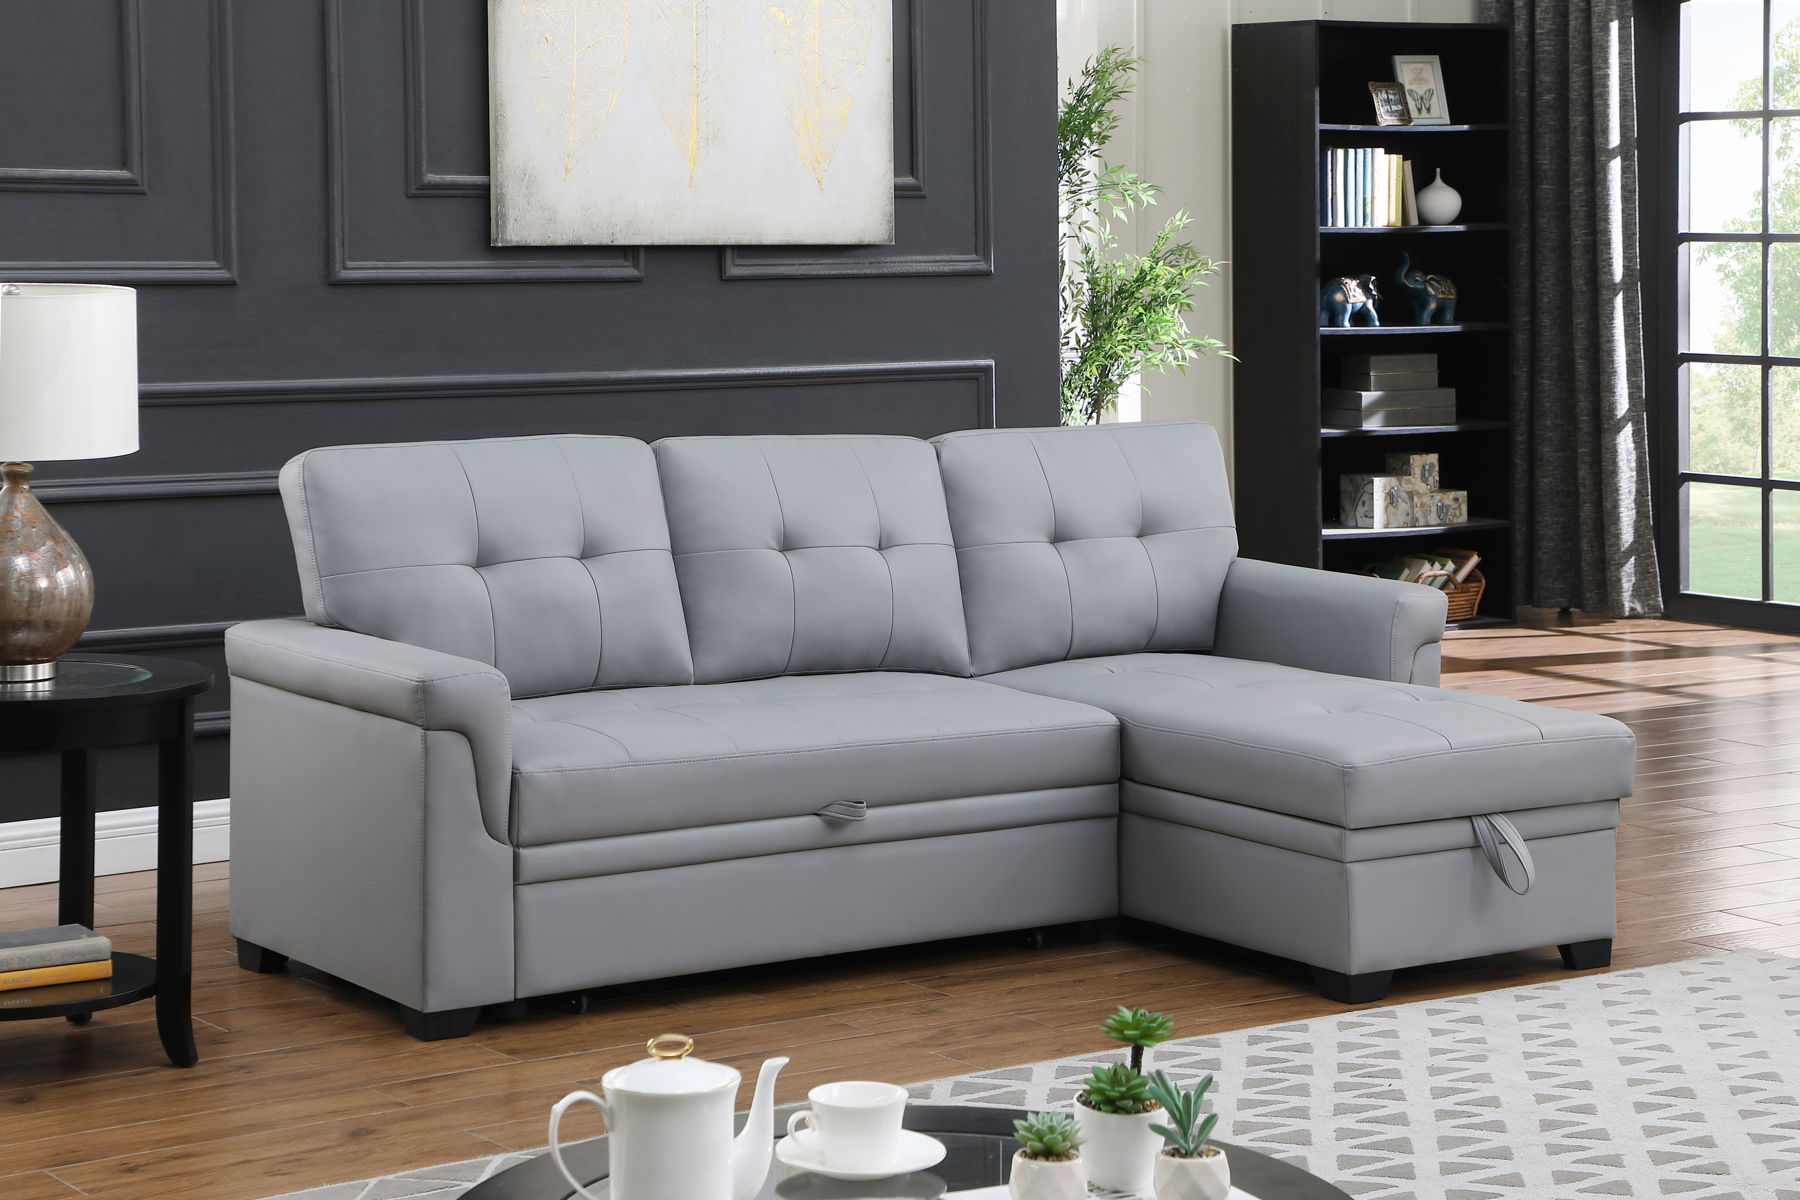 Lexi - Vegan Leather Modern Reversible Sleeper Sectional Sofa With Storage Chaise